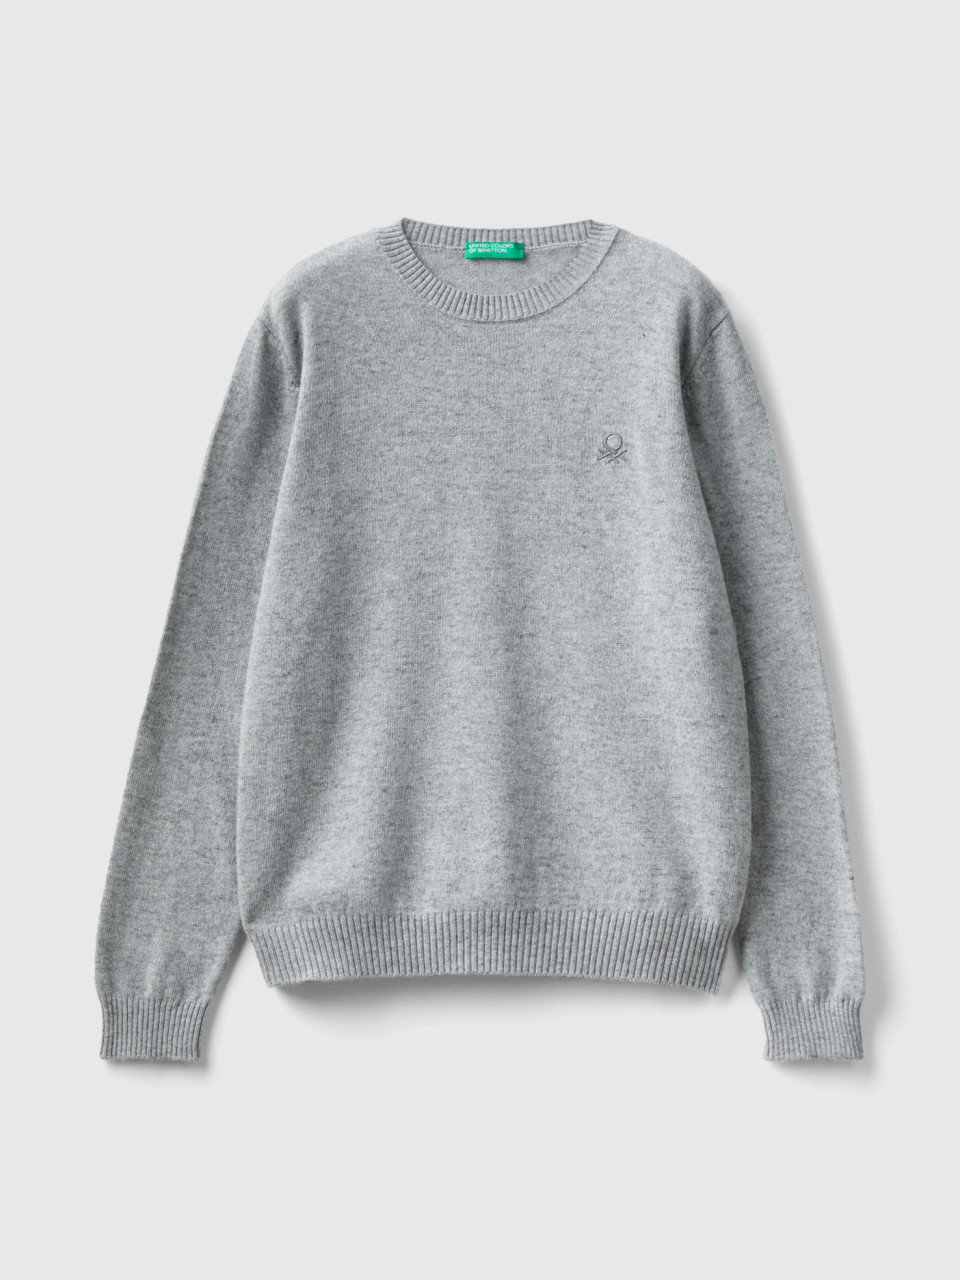 Benetton, Sweater In Cashmere And Wool Blend, Light Gray, Kids